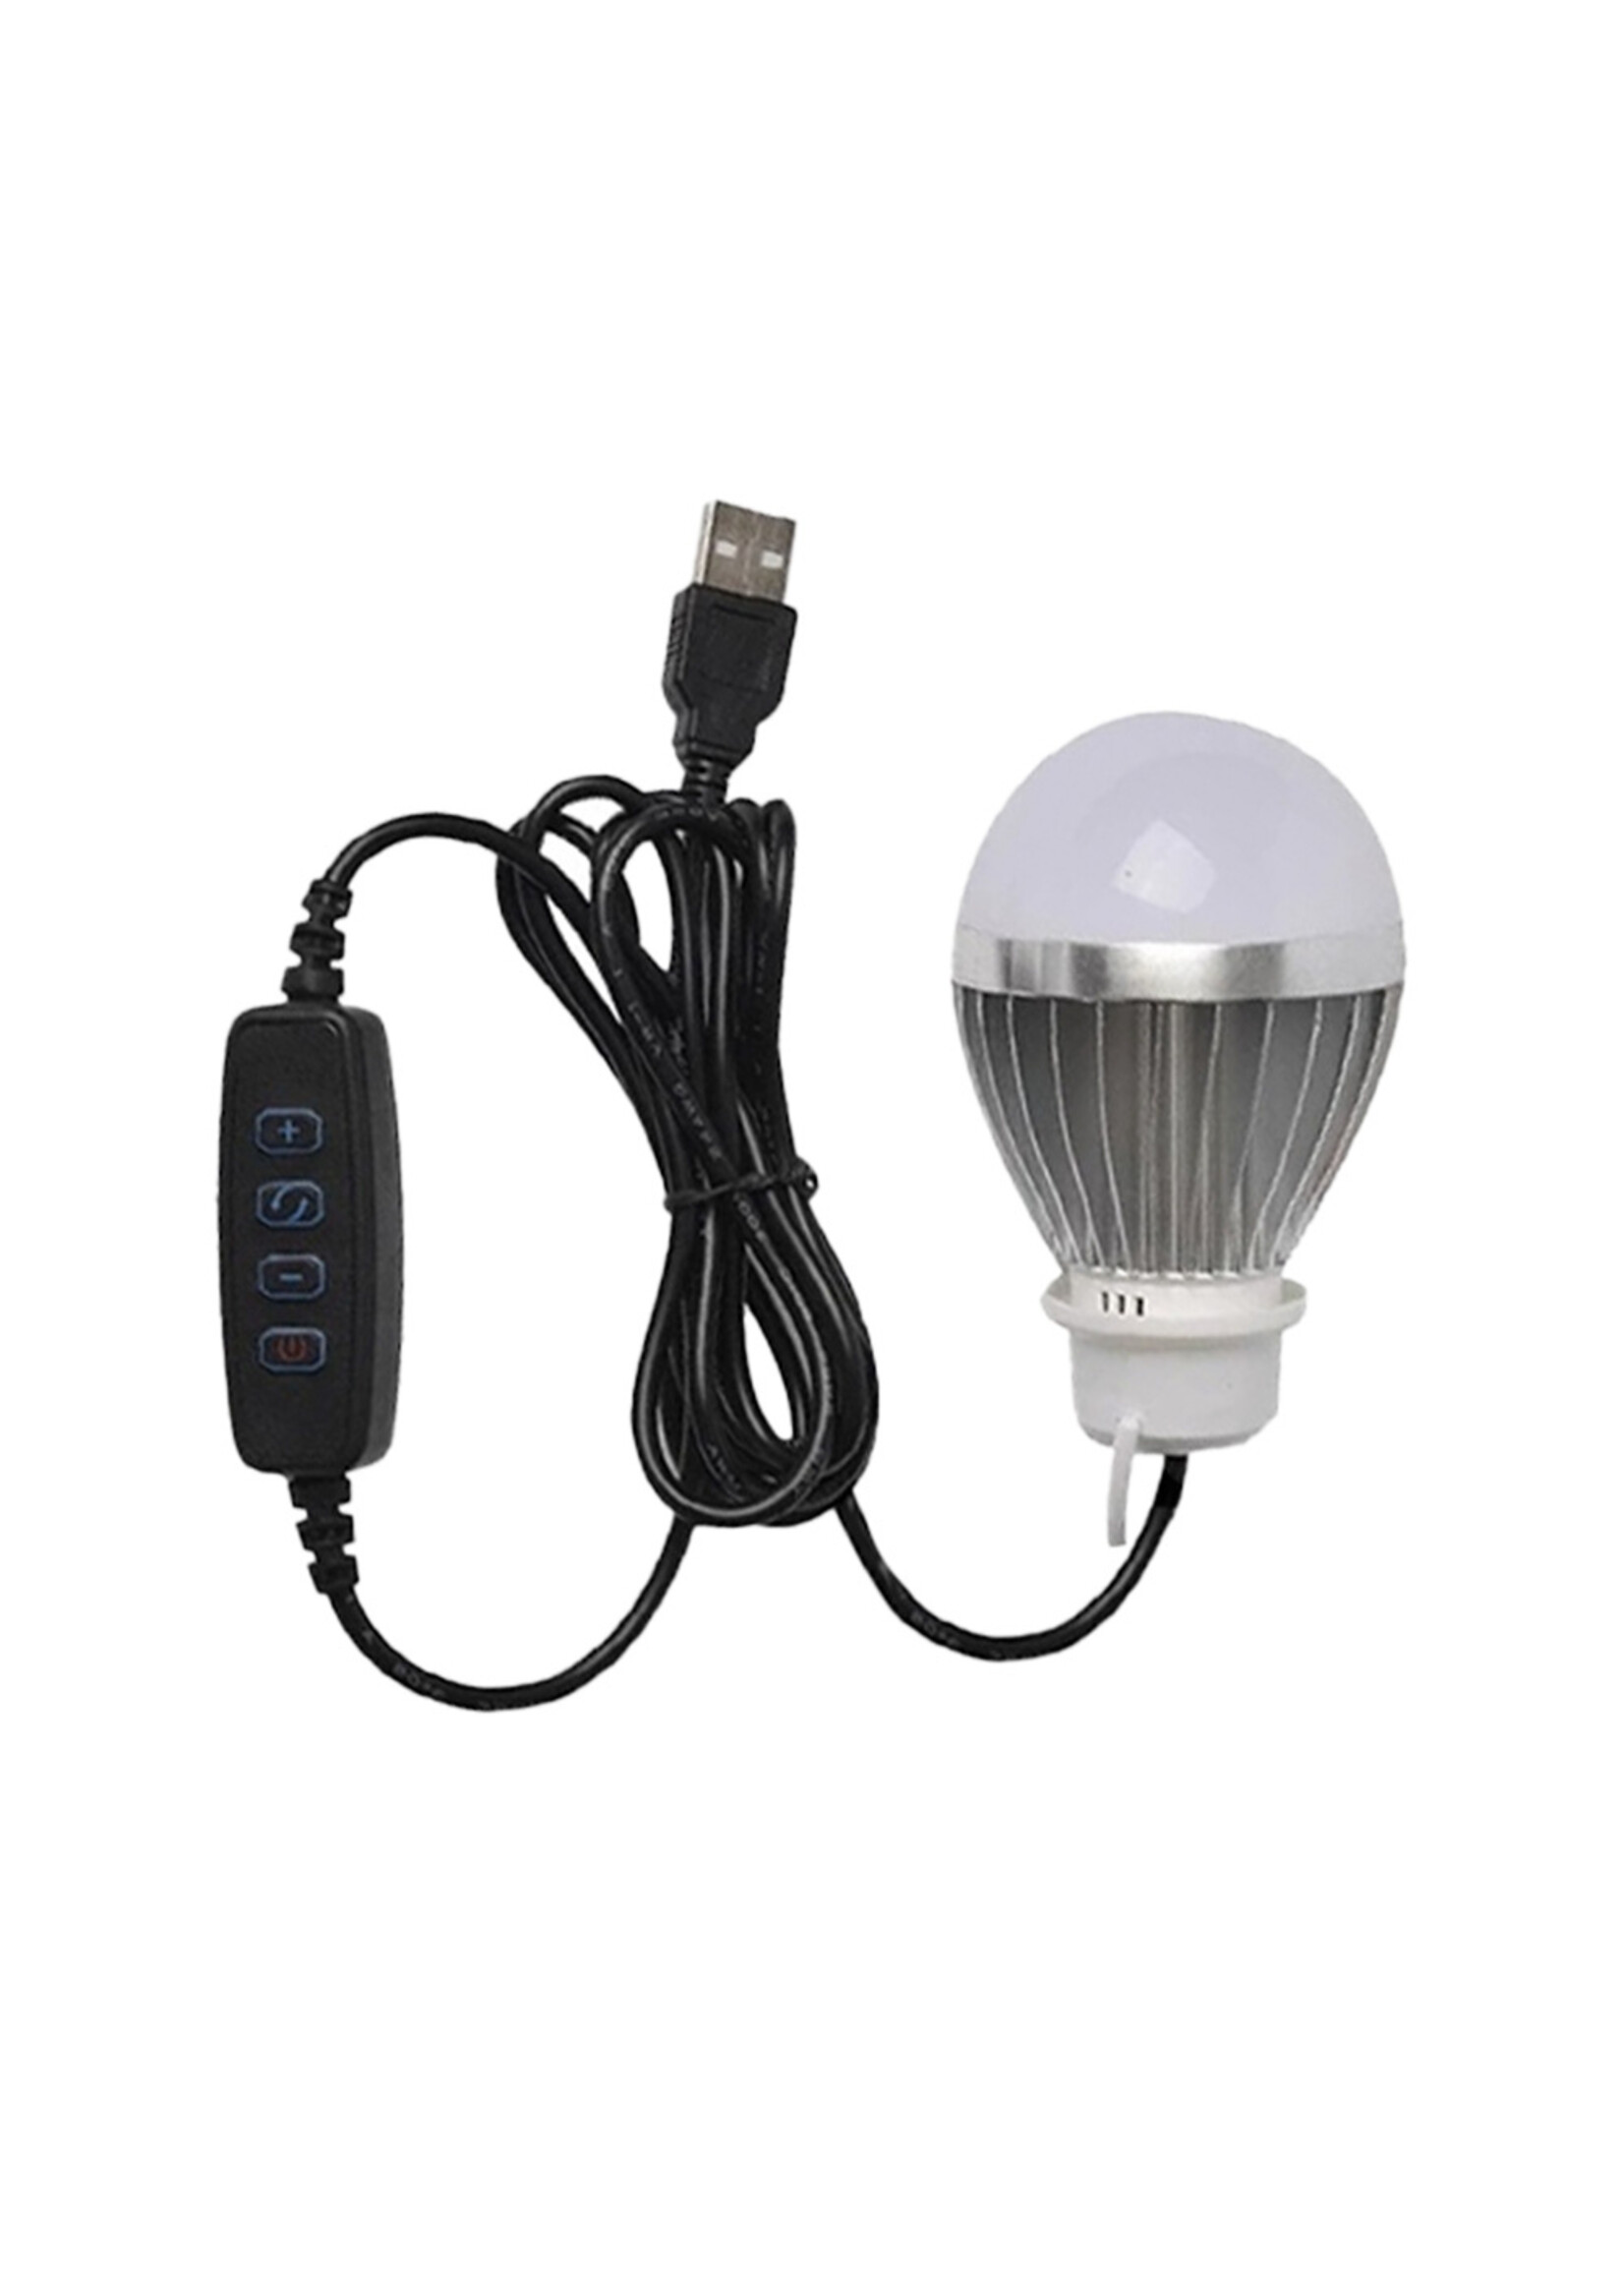 NORSK Lithium Norsk Lithium USB Dimmable LED Light Bulb